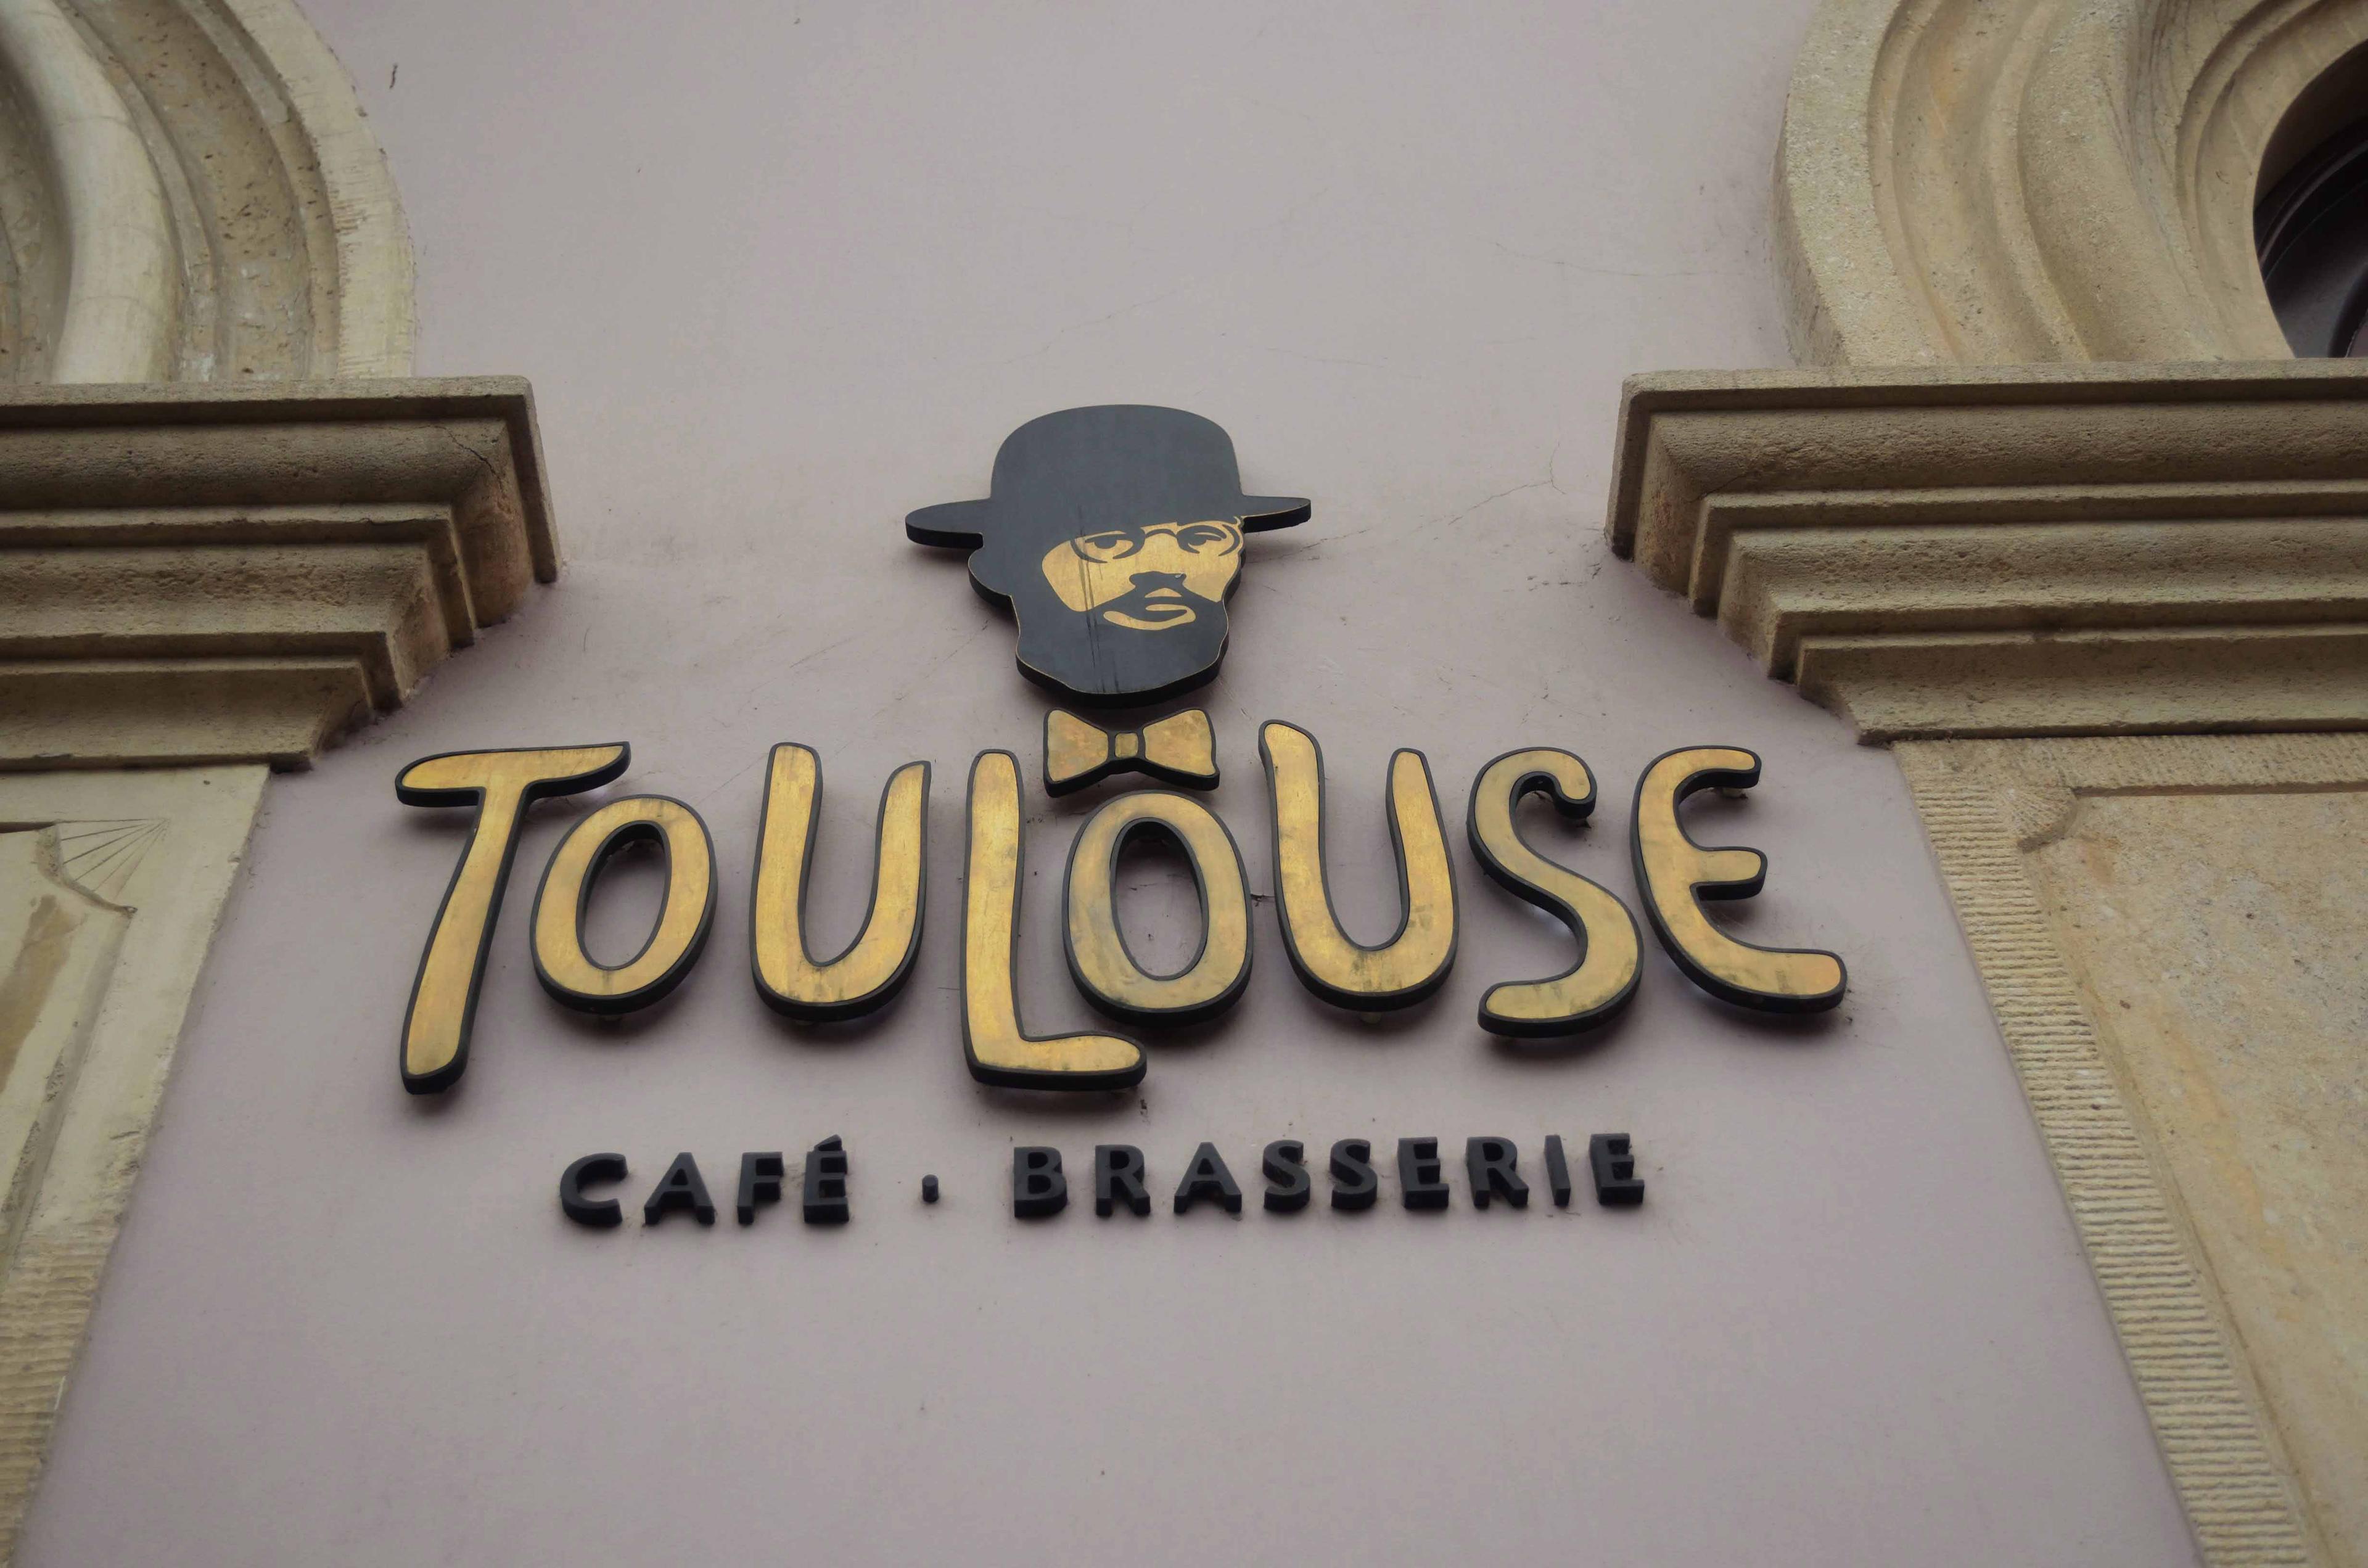 Cover image of this place Toulouse Café-Brasserie